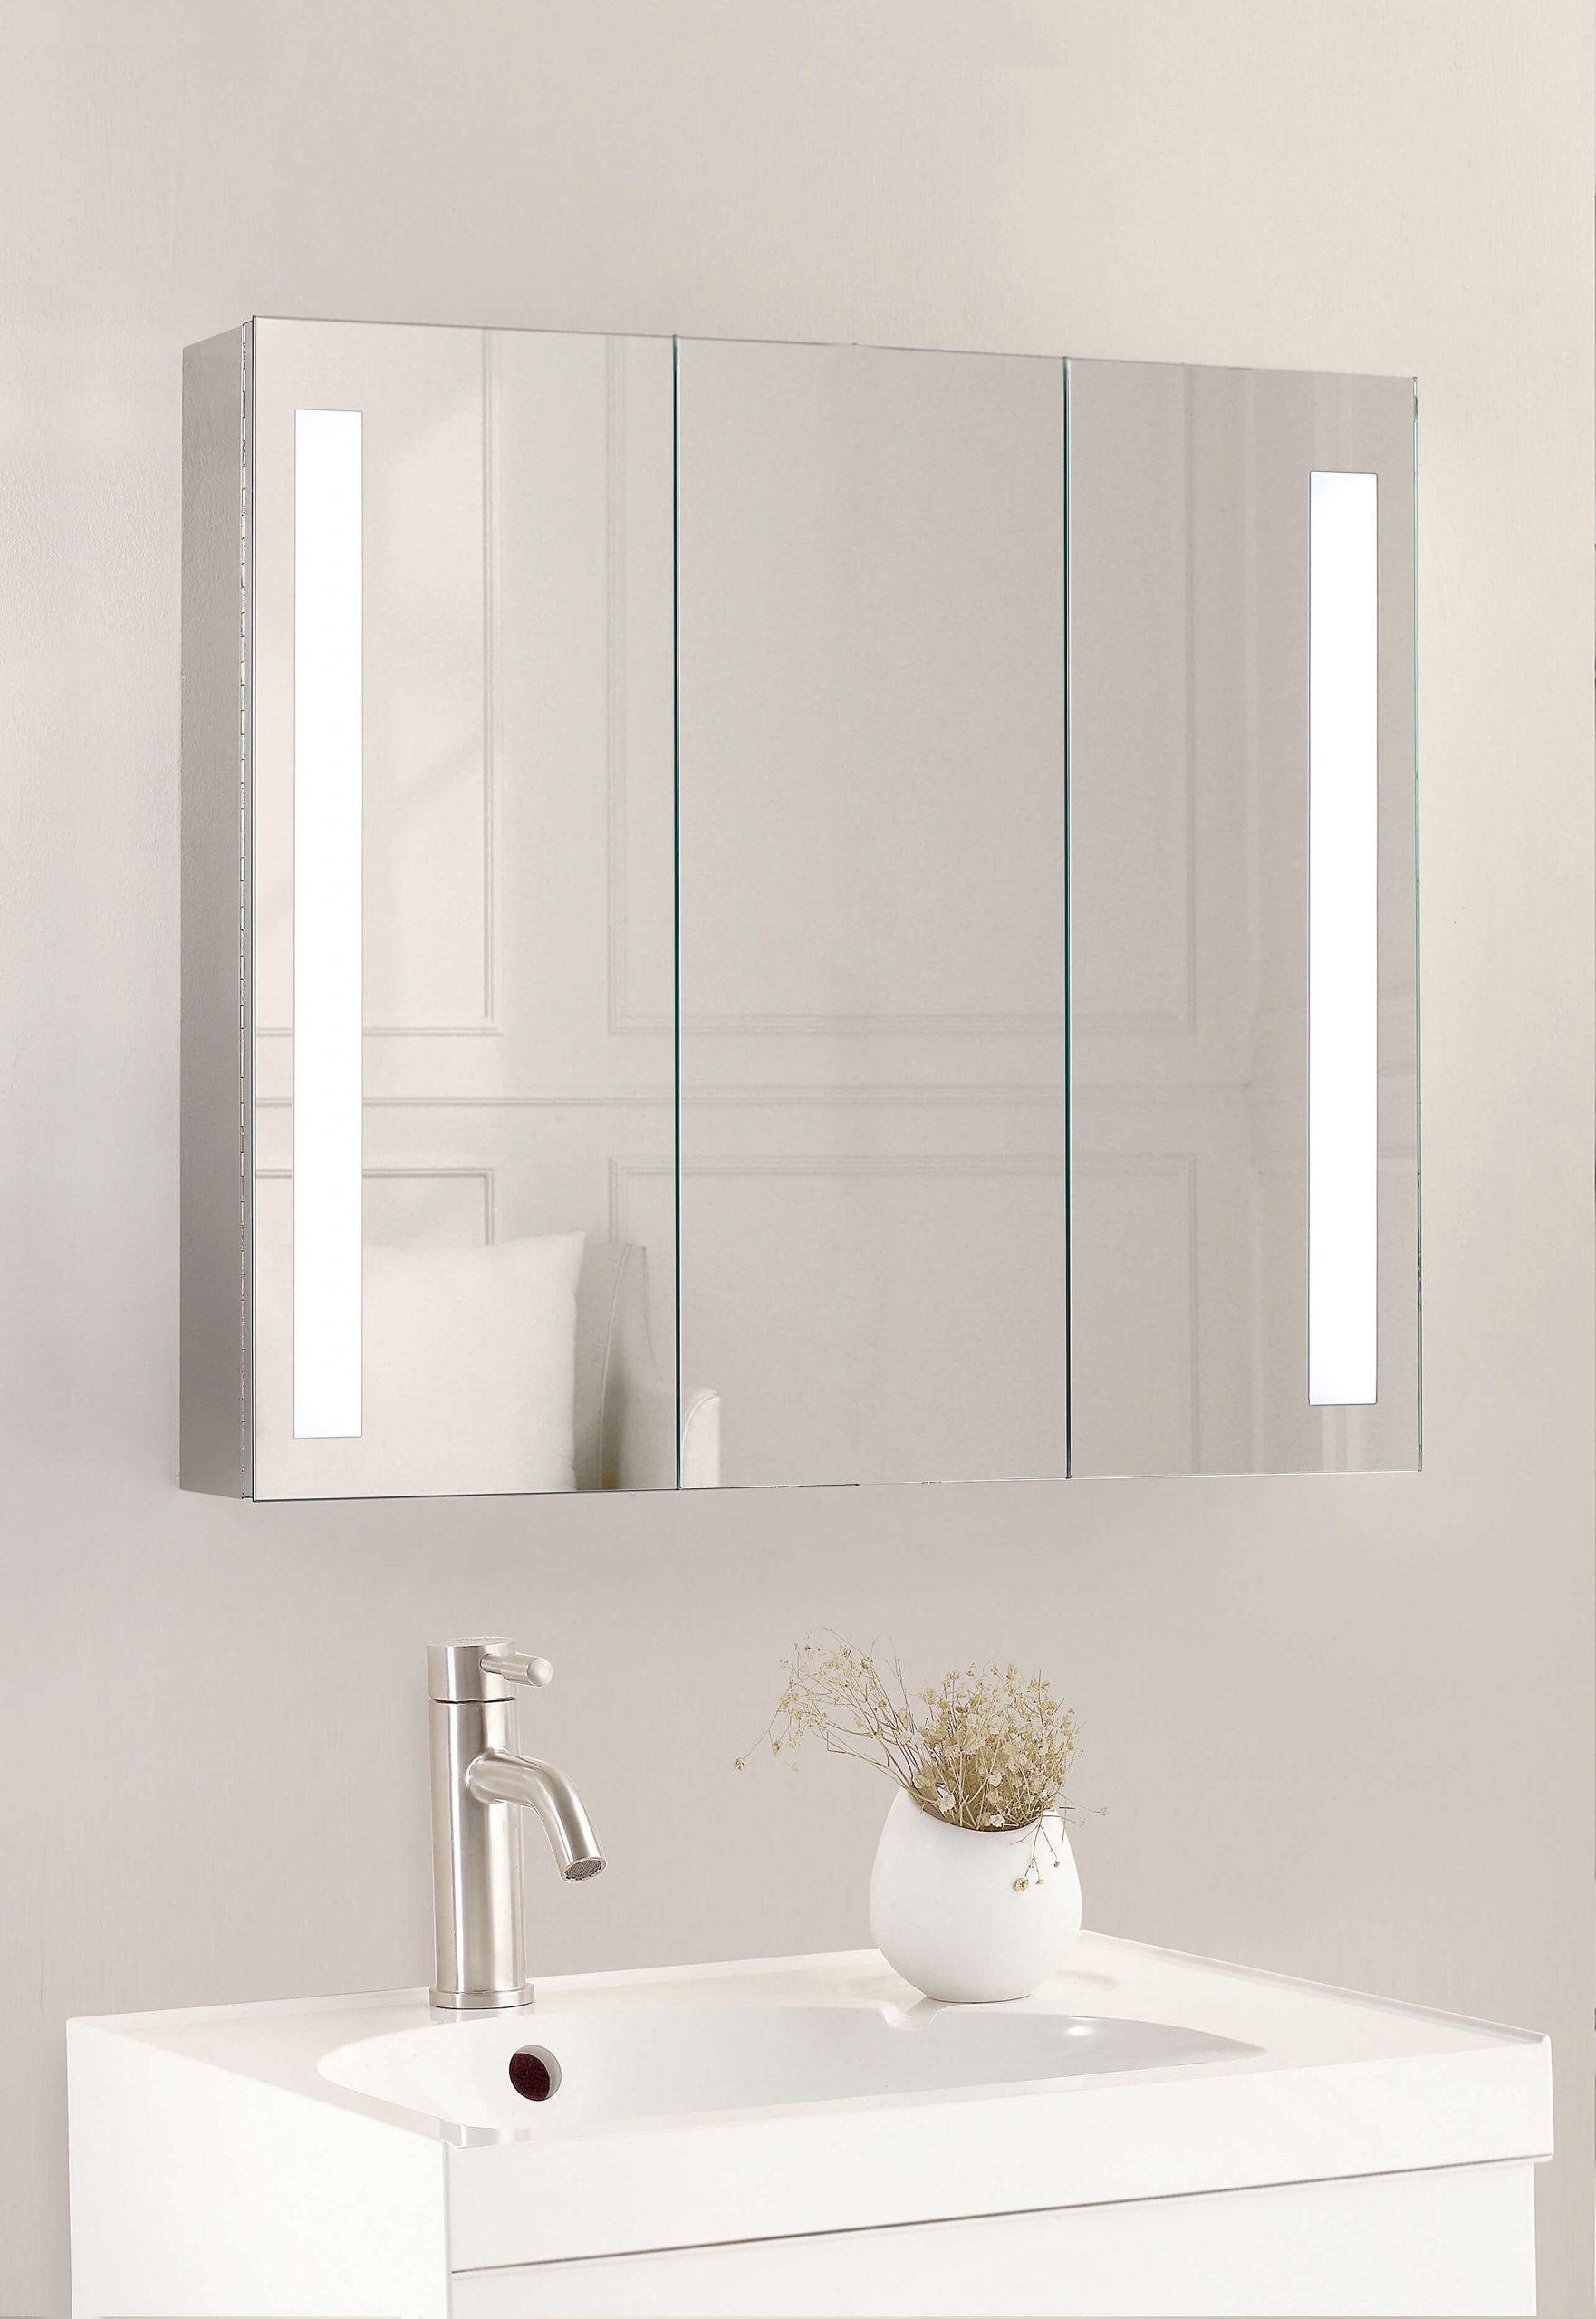 Led Mirror Cabinet Strip Lights Otc, Wall Mounted Bathroom Cabinet With Mirror And Lights